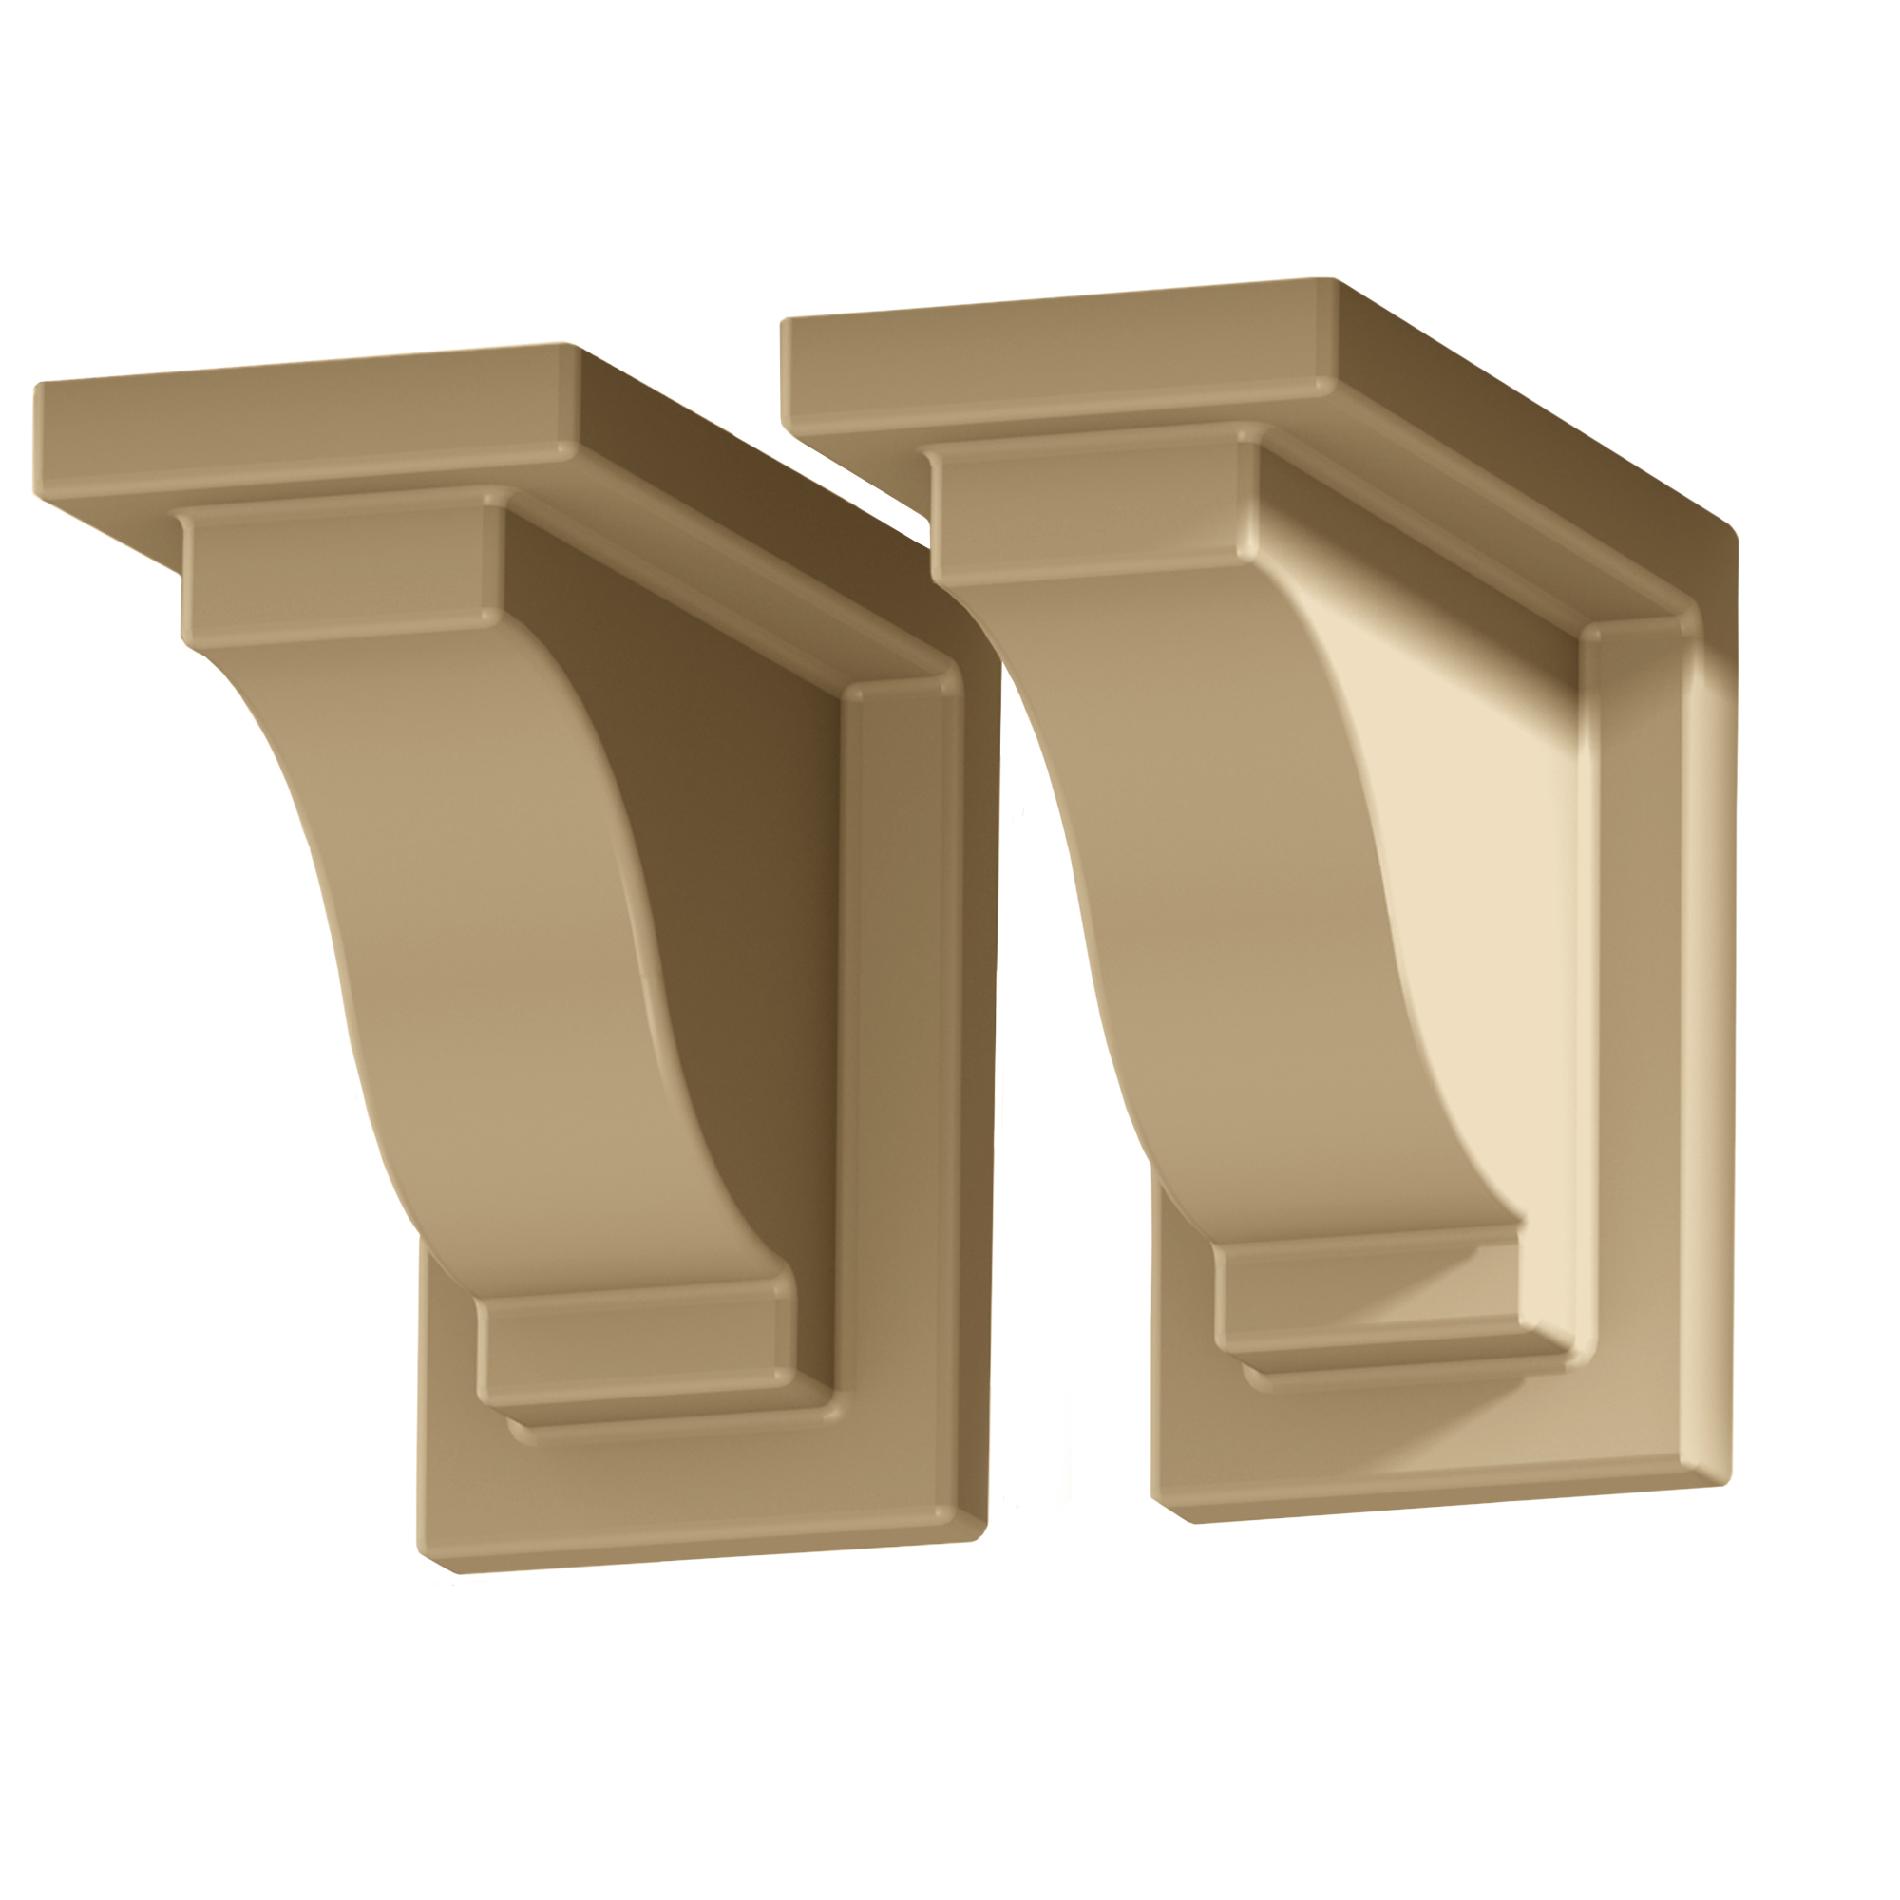 Yorkshire Decorative Brackets (2pack)  White Or Clay